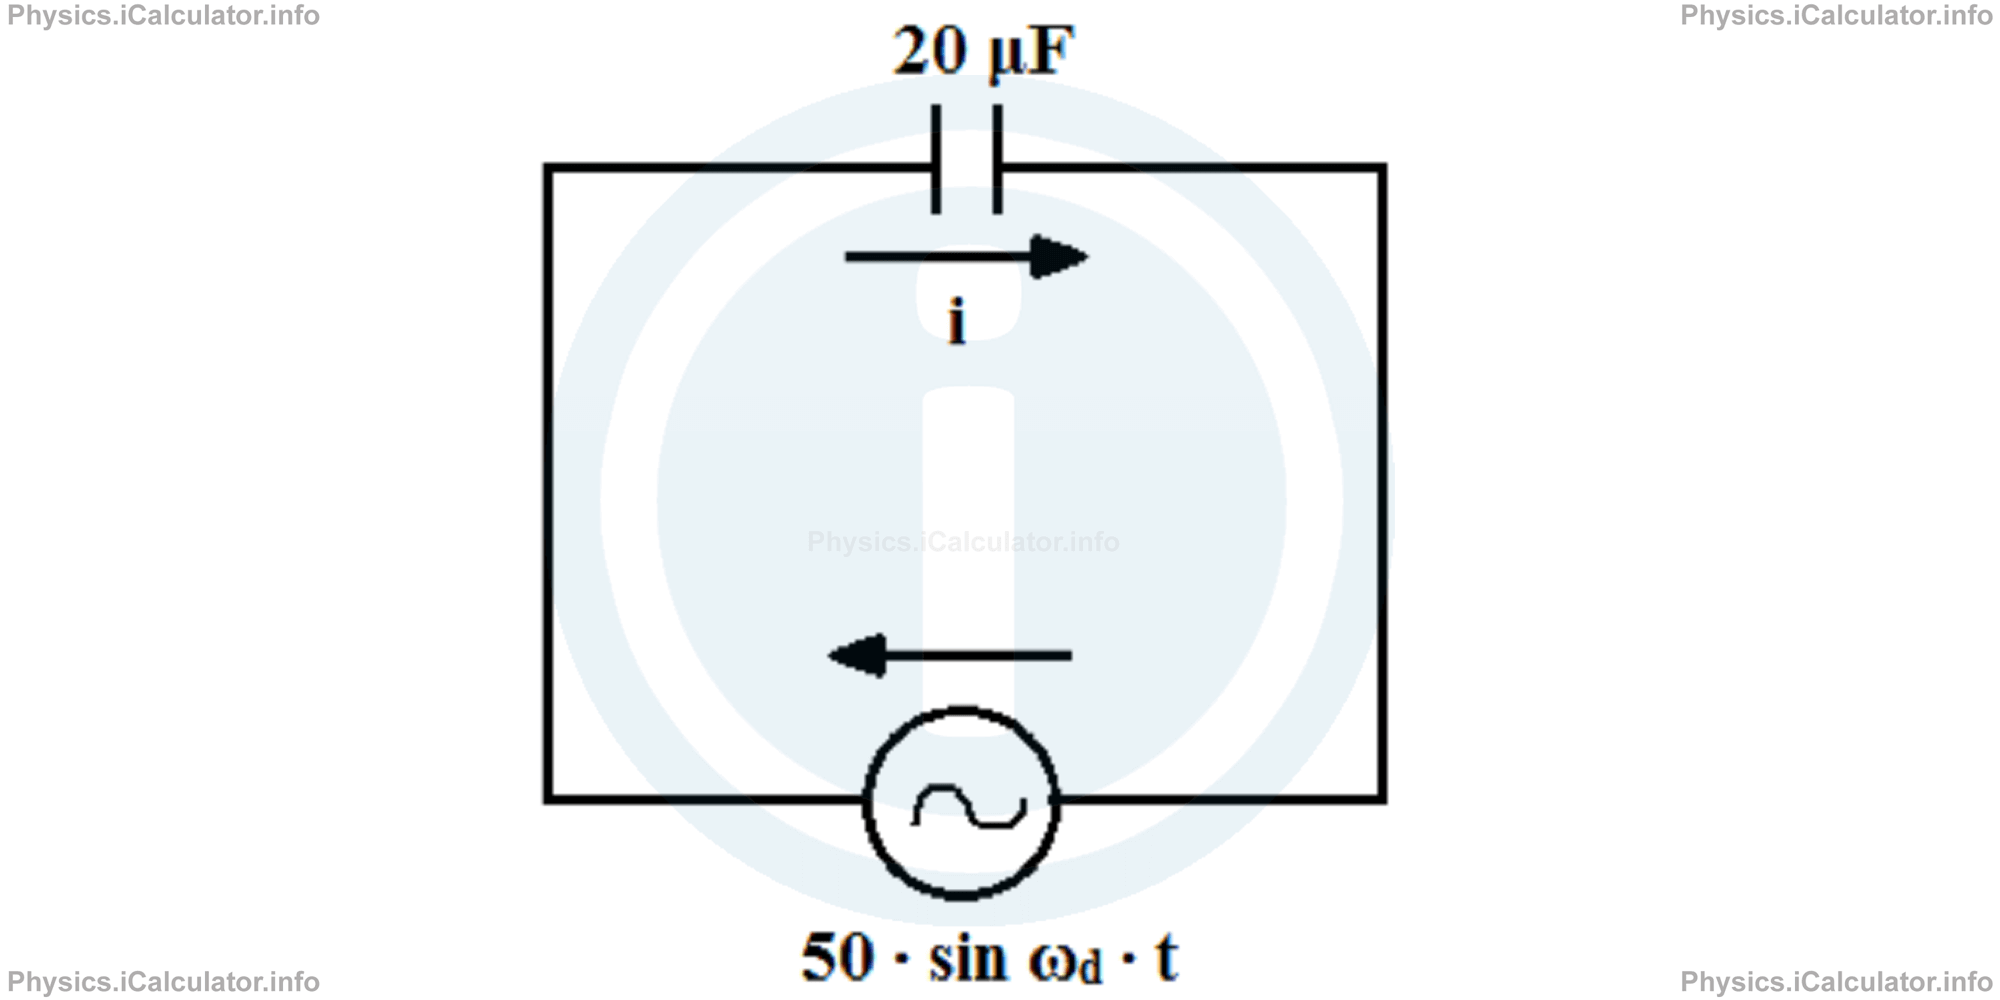 Physics Tutorials: This image provides visual information for the physics tutorial Introduction to RLC Circuits 